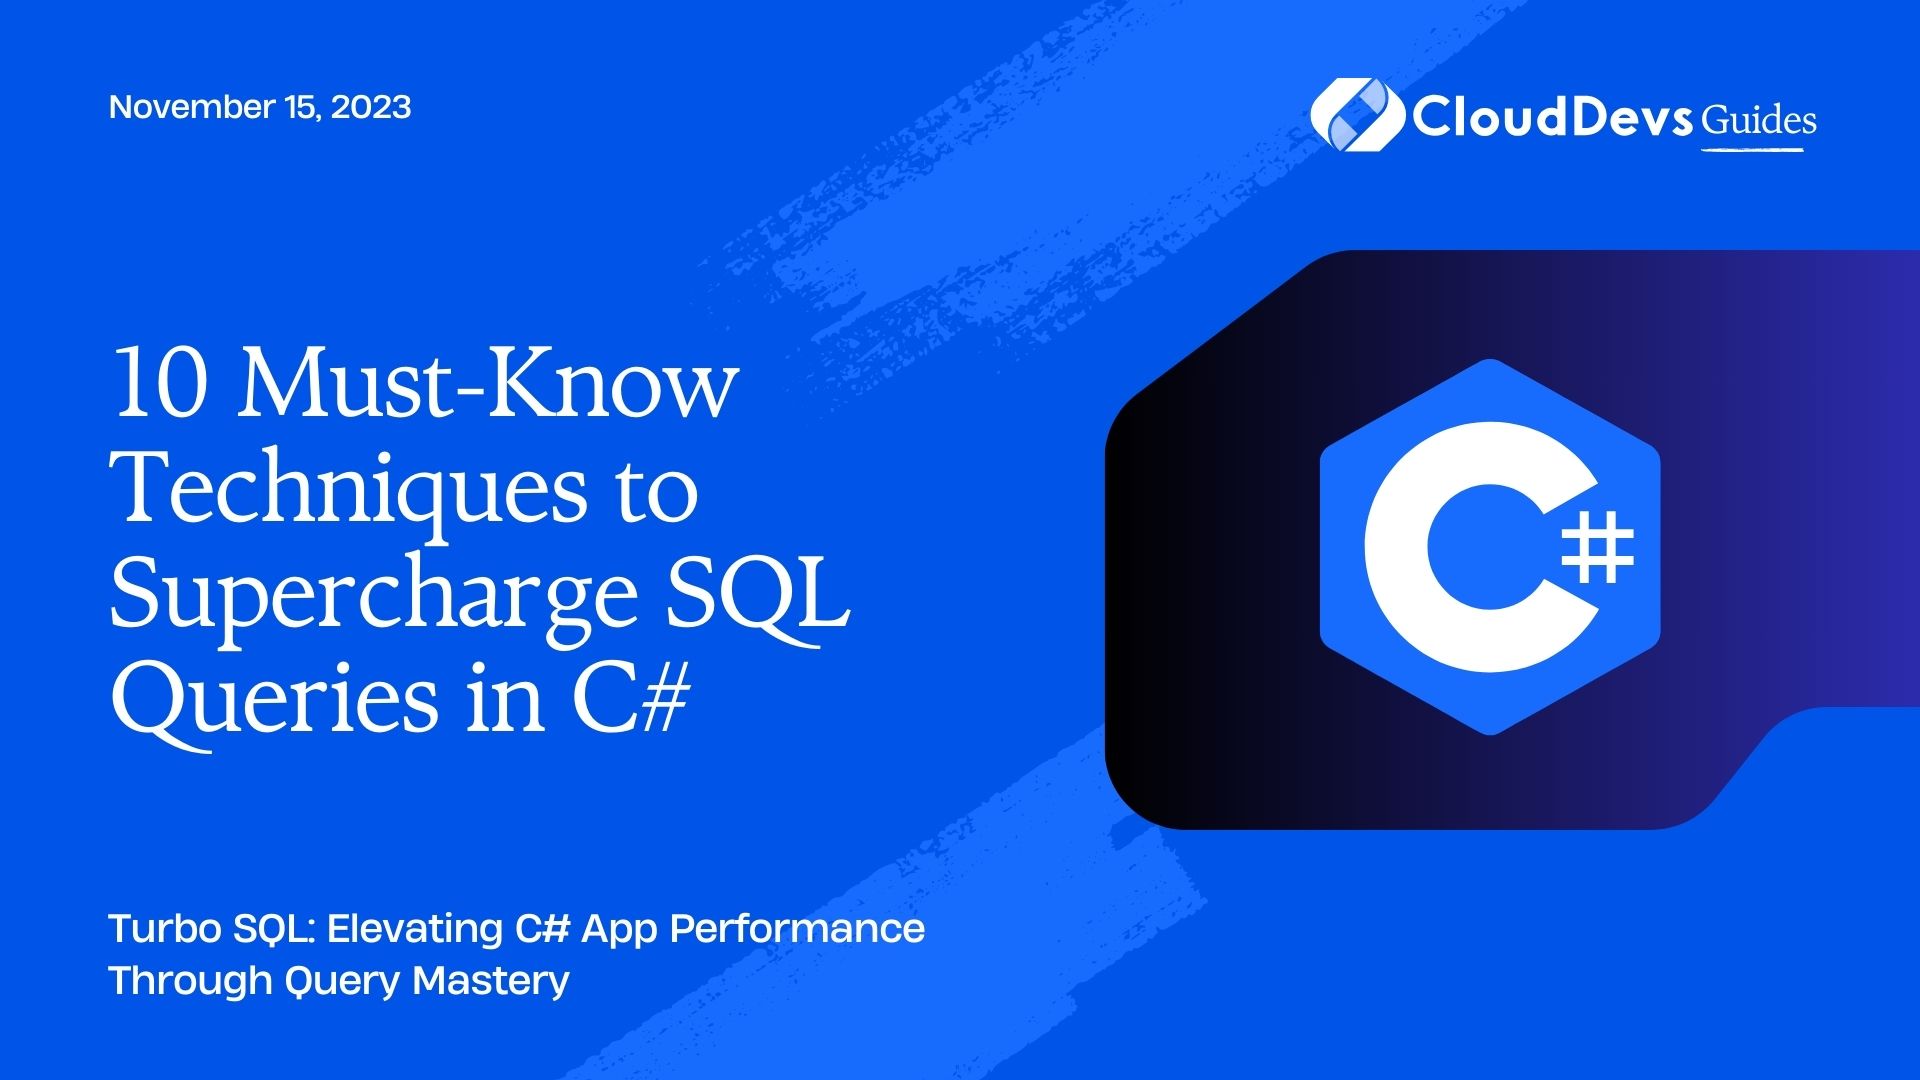 10 Must-Know Techniques to Supercharge SQL Queries in C#